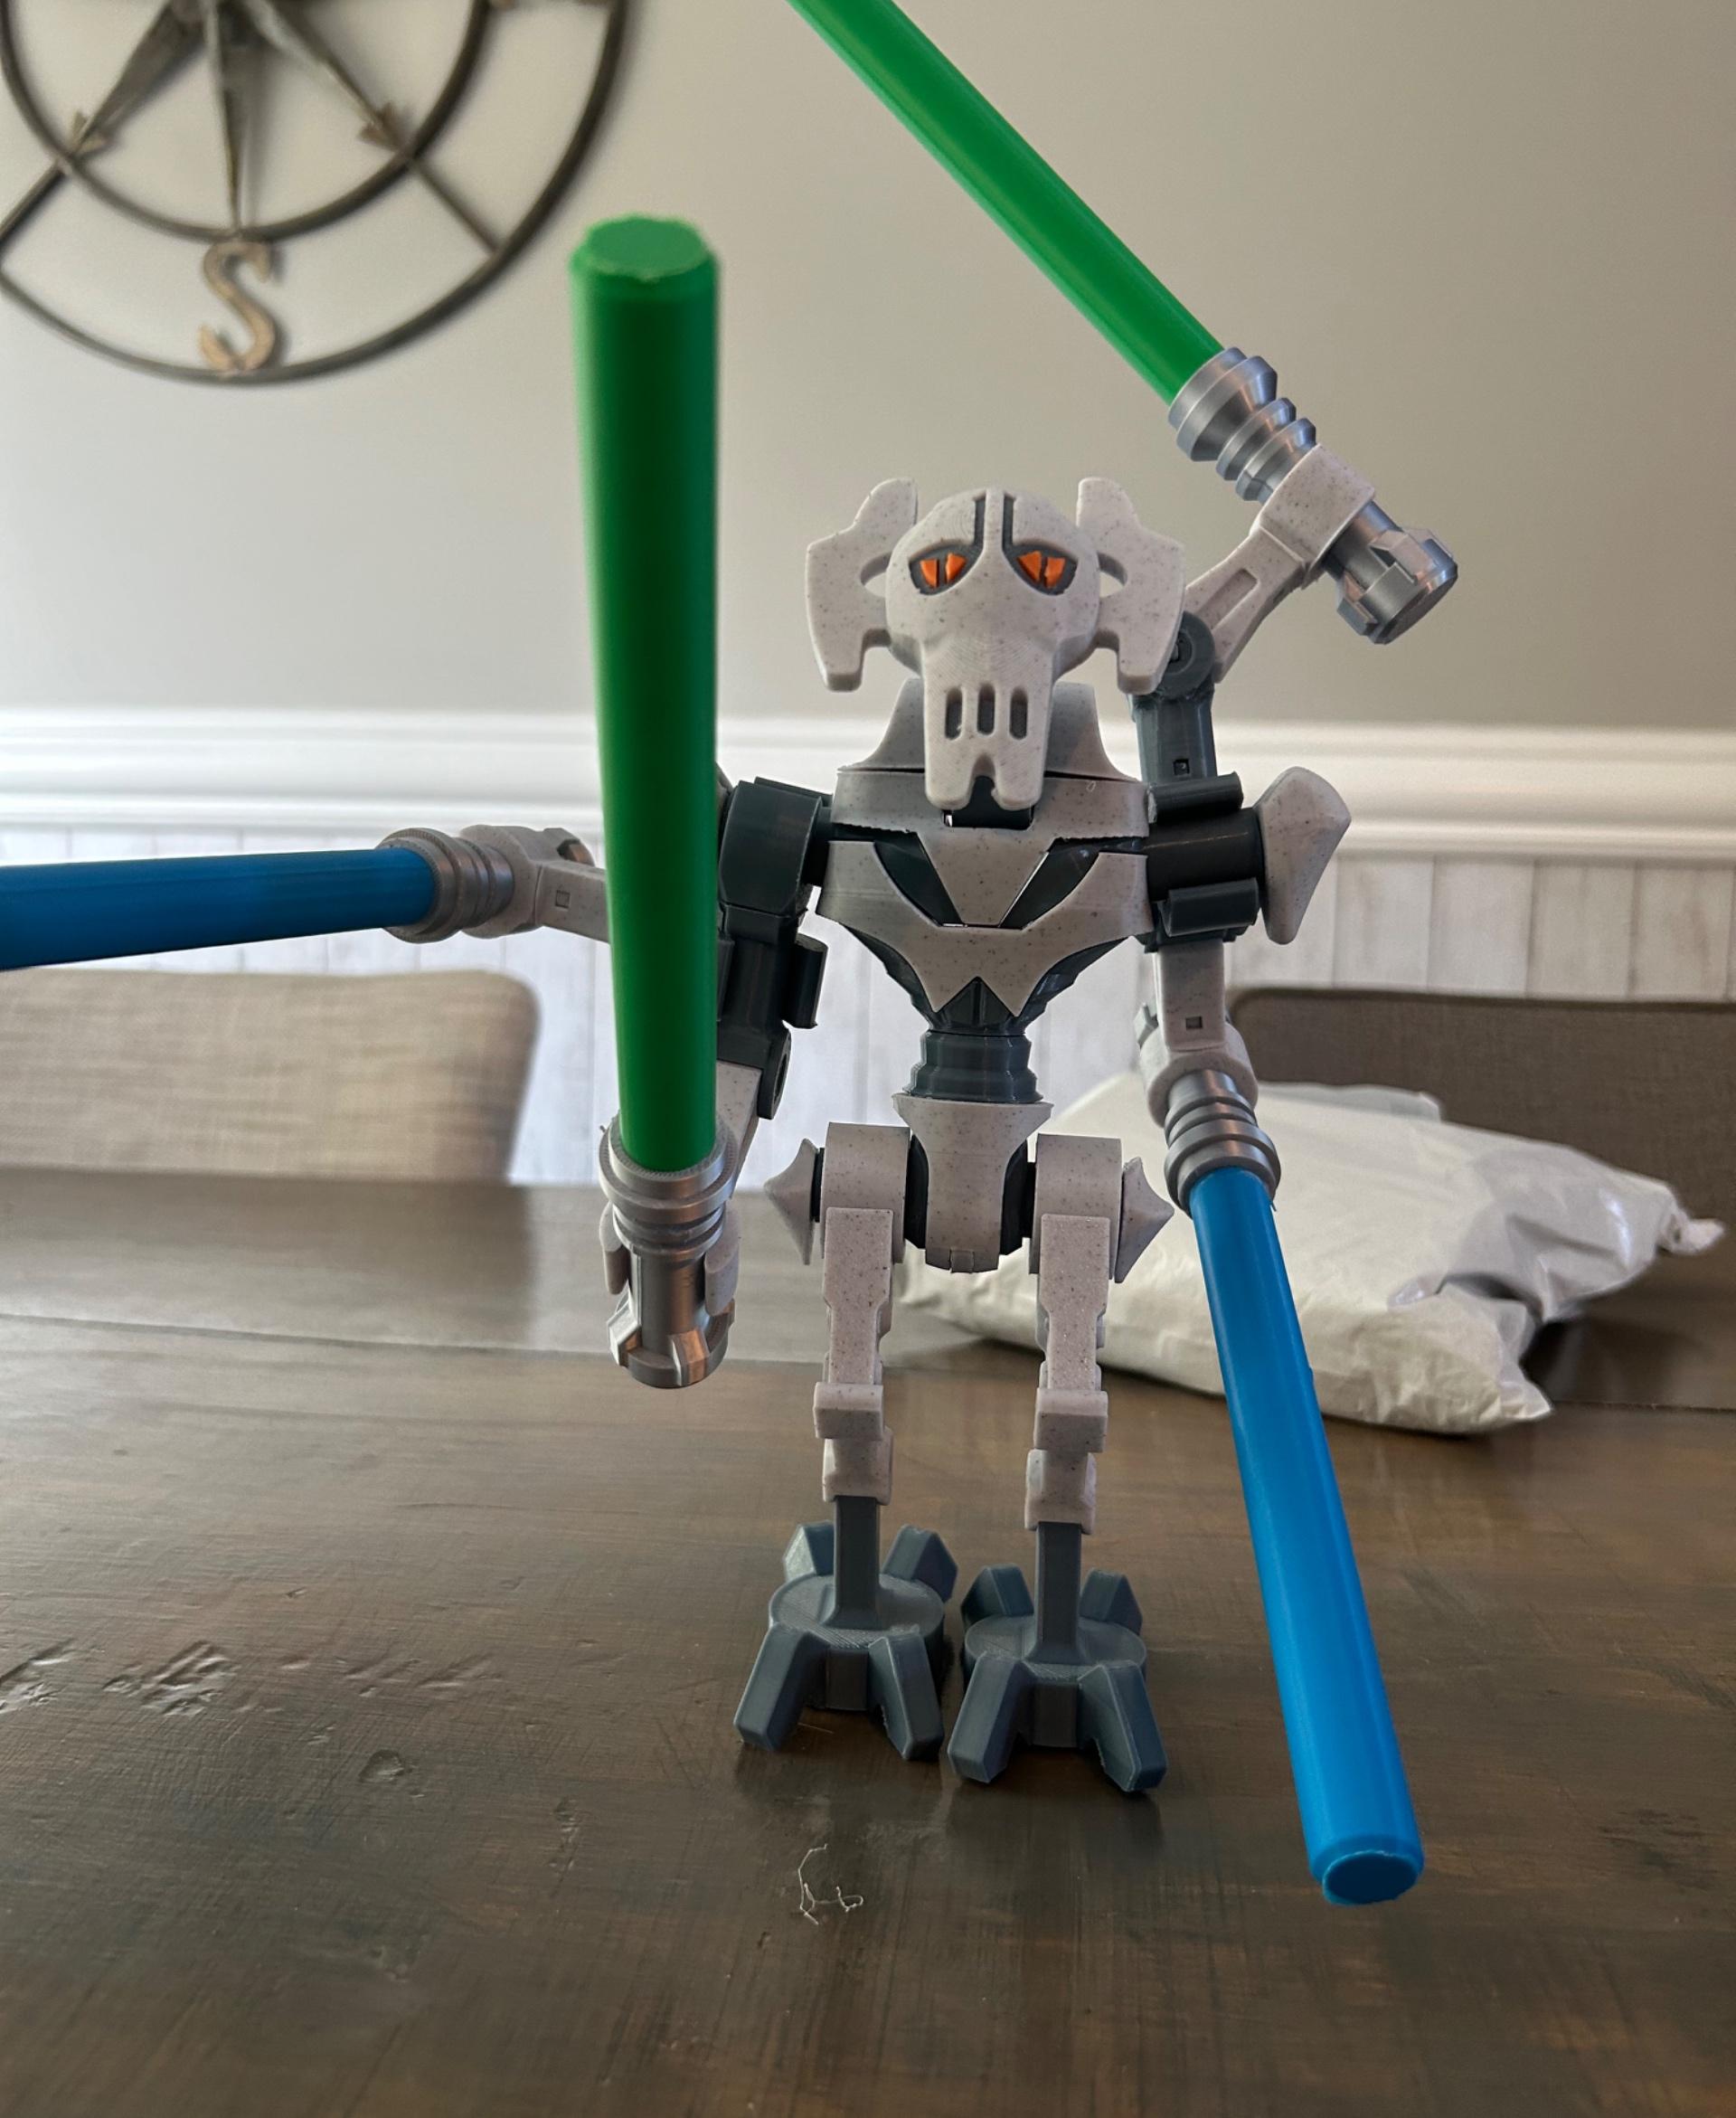 General Grievous (6:1 LEGO-inspired brick figure, NO MMU/AMS, NO supports, NO glue) - He is a beast! - 3d model